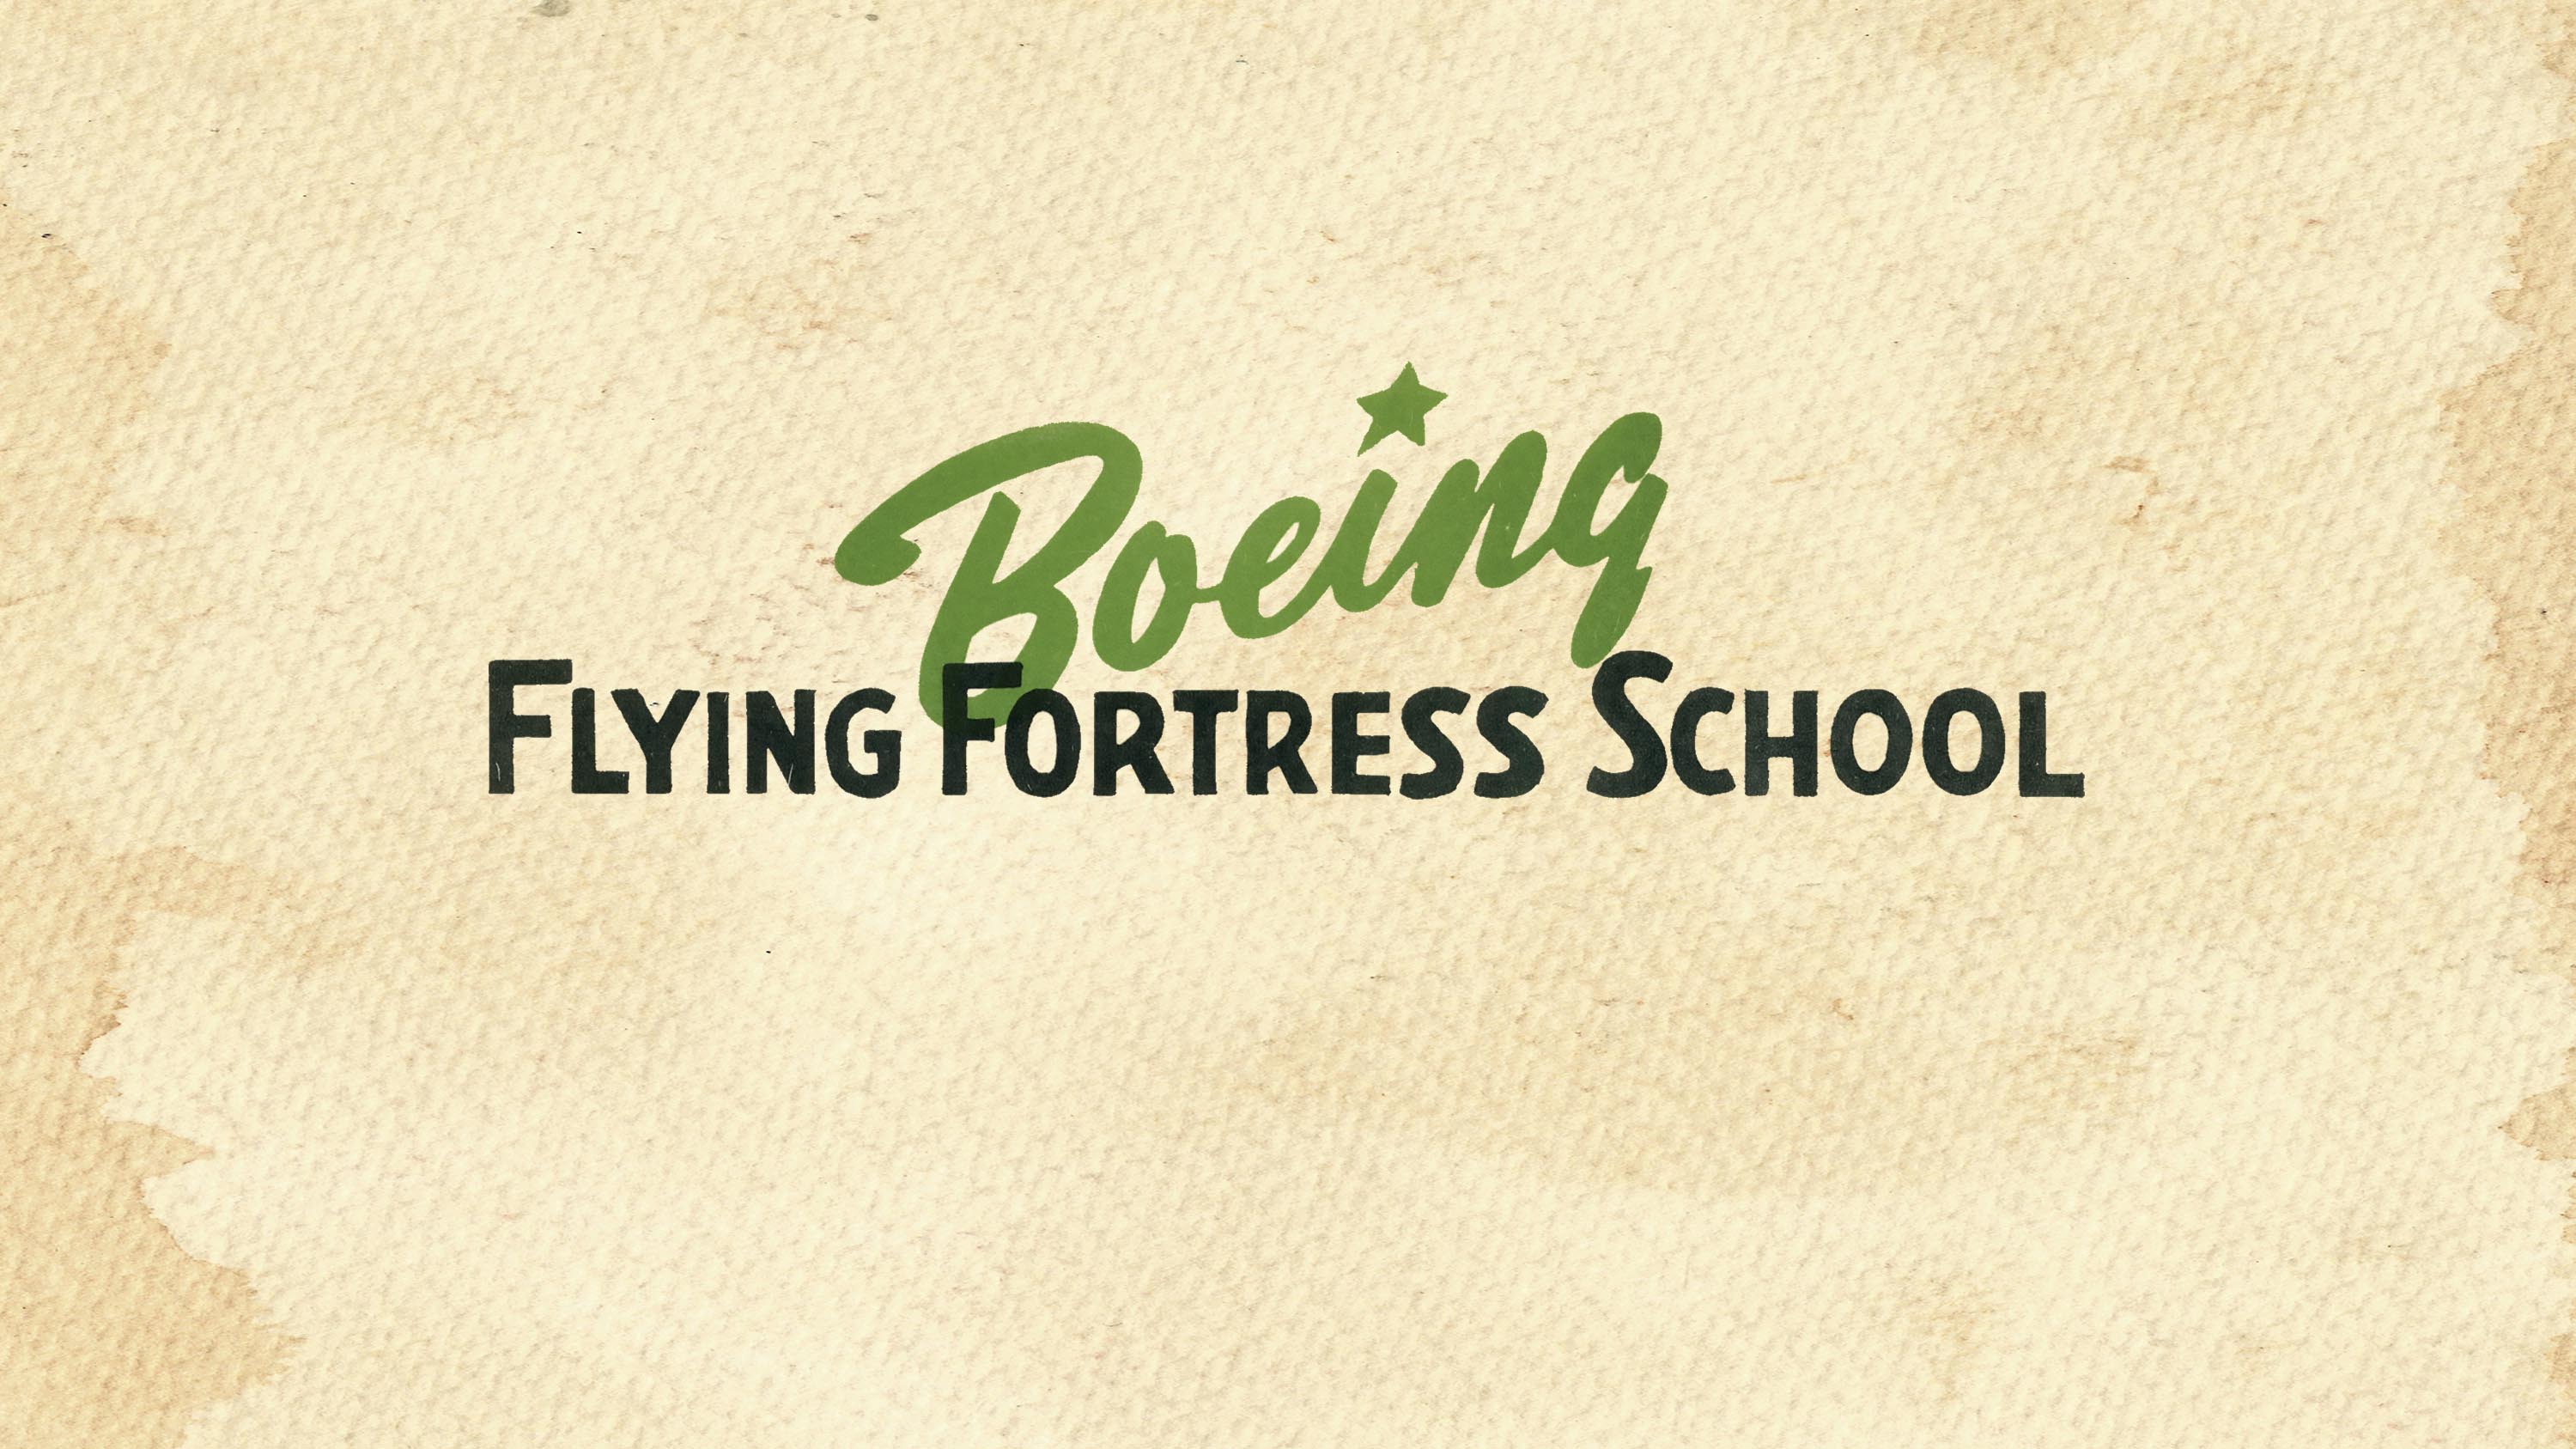 The words "Boeing Flying Fortress School" on vintage paper.